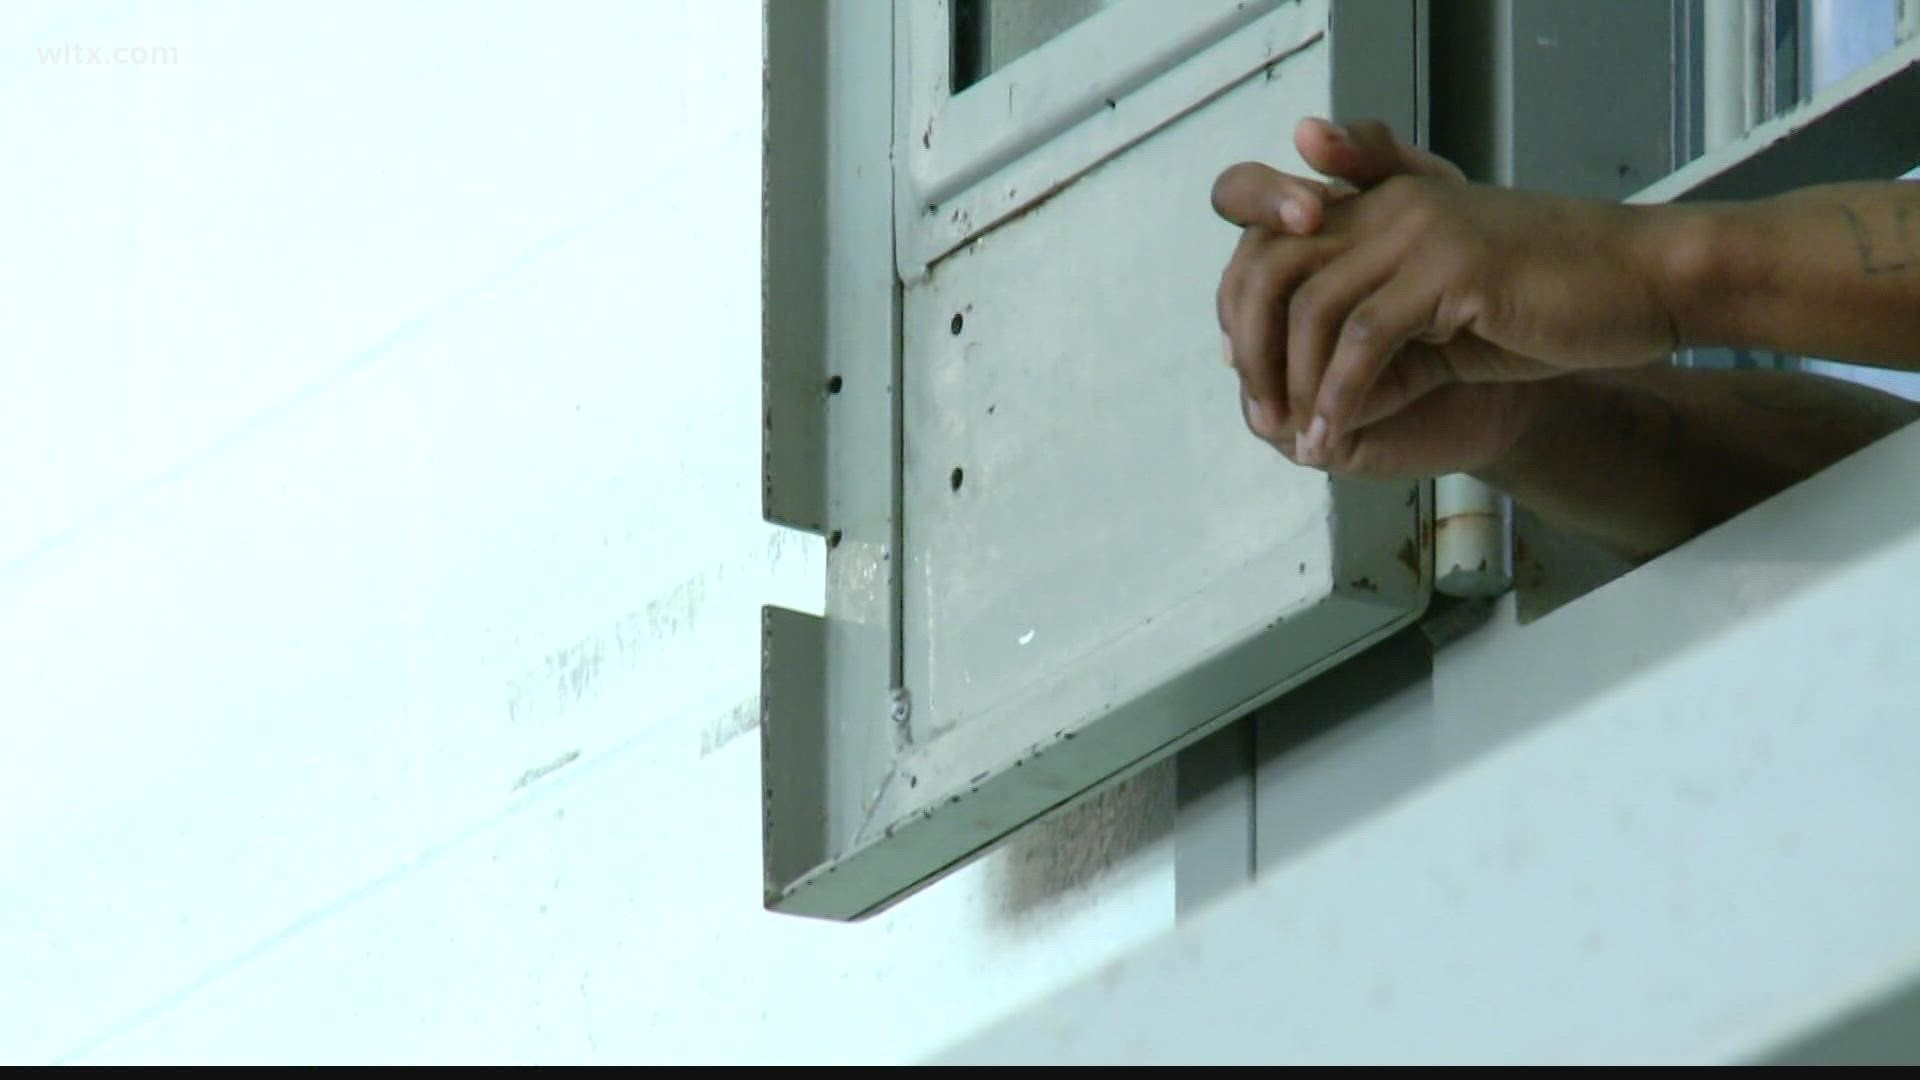 Families and inmates say living conditions in the jail have been poor for months. Richland County says they're working to improve conditions.